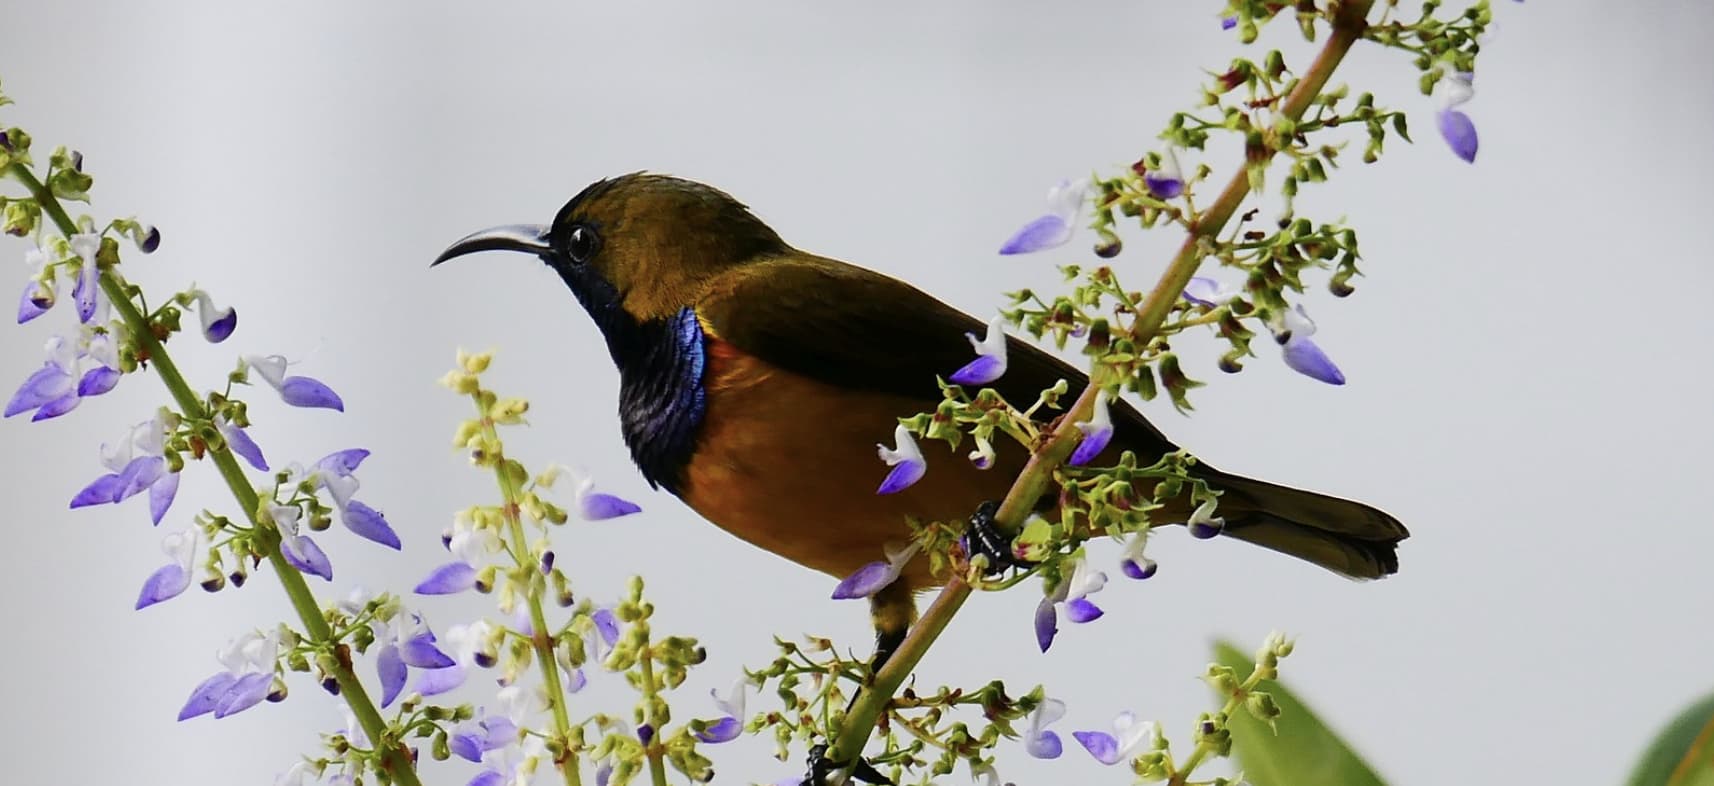 A sunbird sitting on a branch with small purple flowers